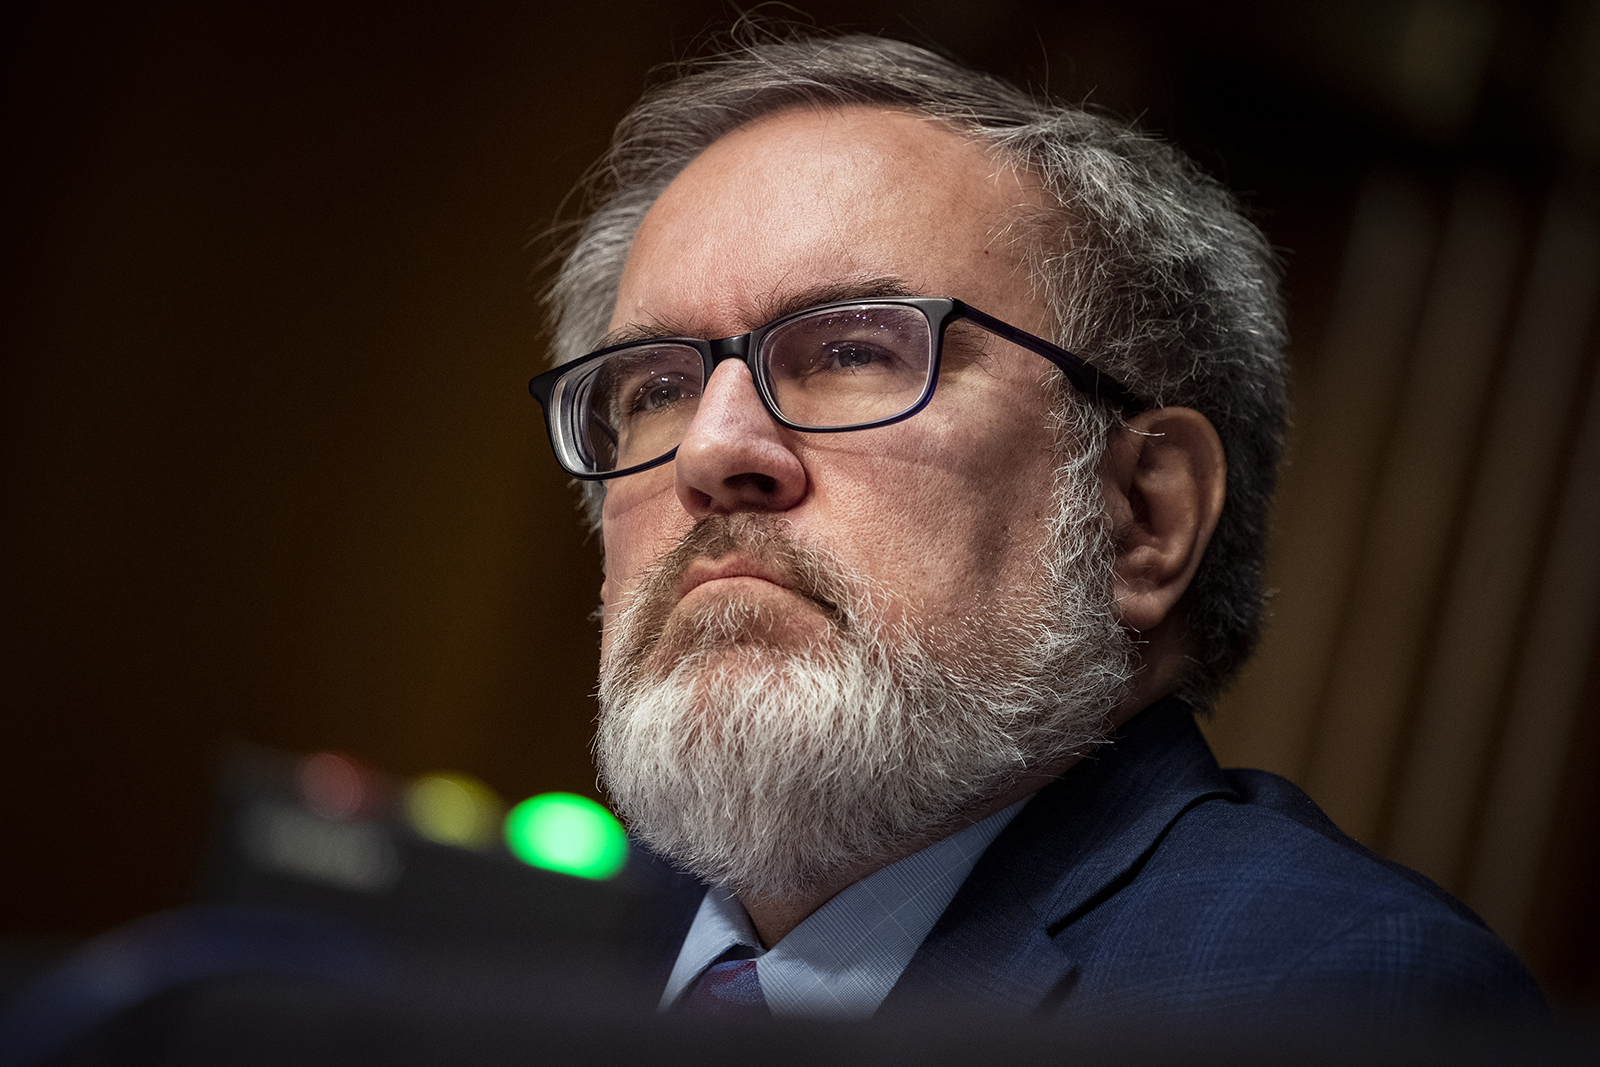 Andrew Wheeler, administrator of the Environmental Protection Agency (EPA), listens during a Senate Environment and Public Works Committee hearing on May 20 in Washington.